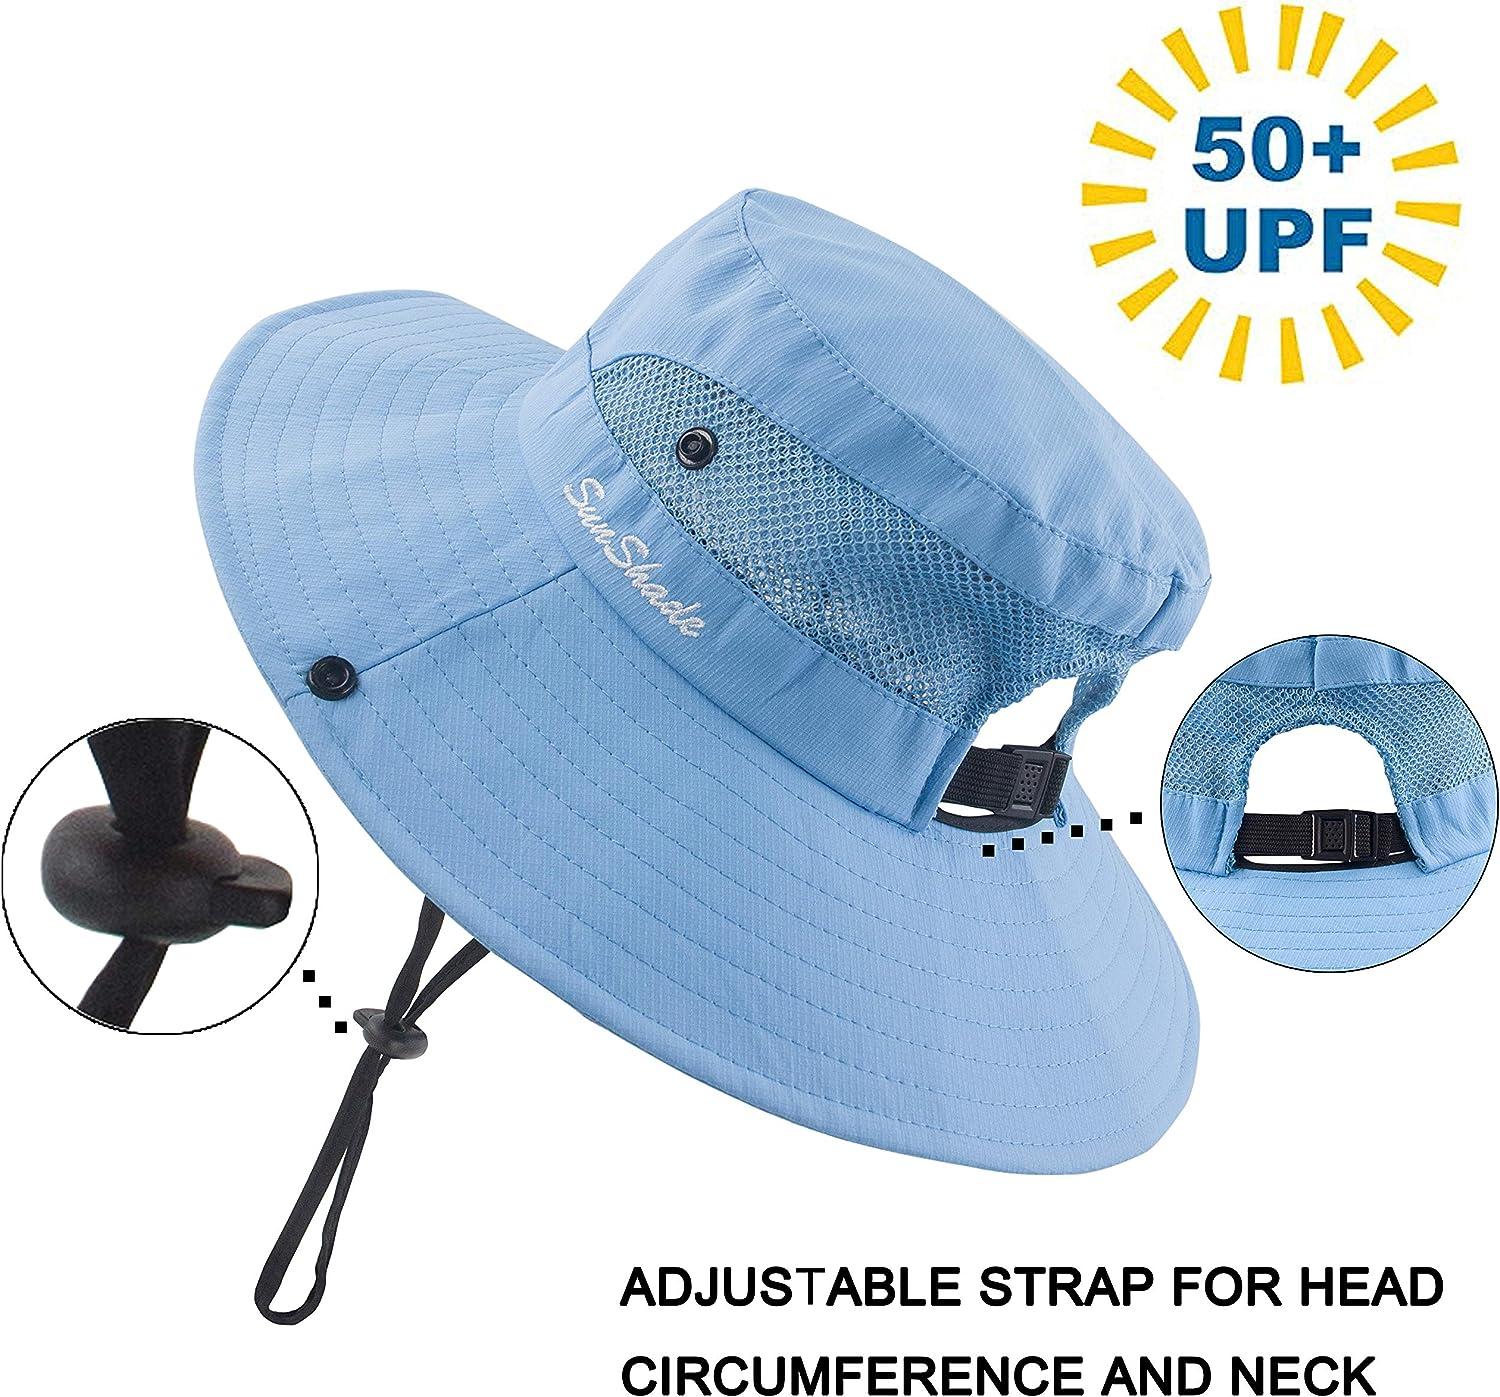 Women's Waterproof Wide Brim Sun Protection Bucket Hat With Ponytail Hole - Perfect For Hiking And Fishing